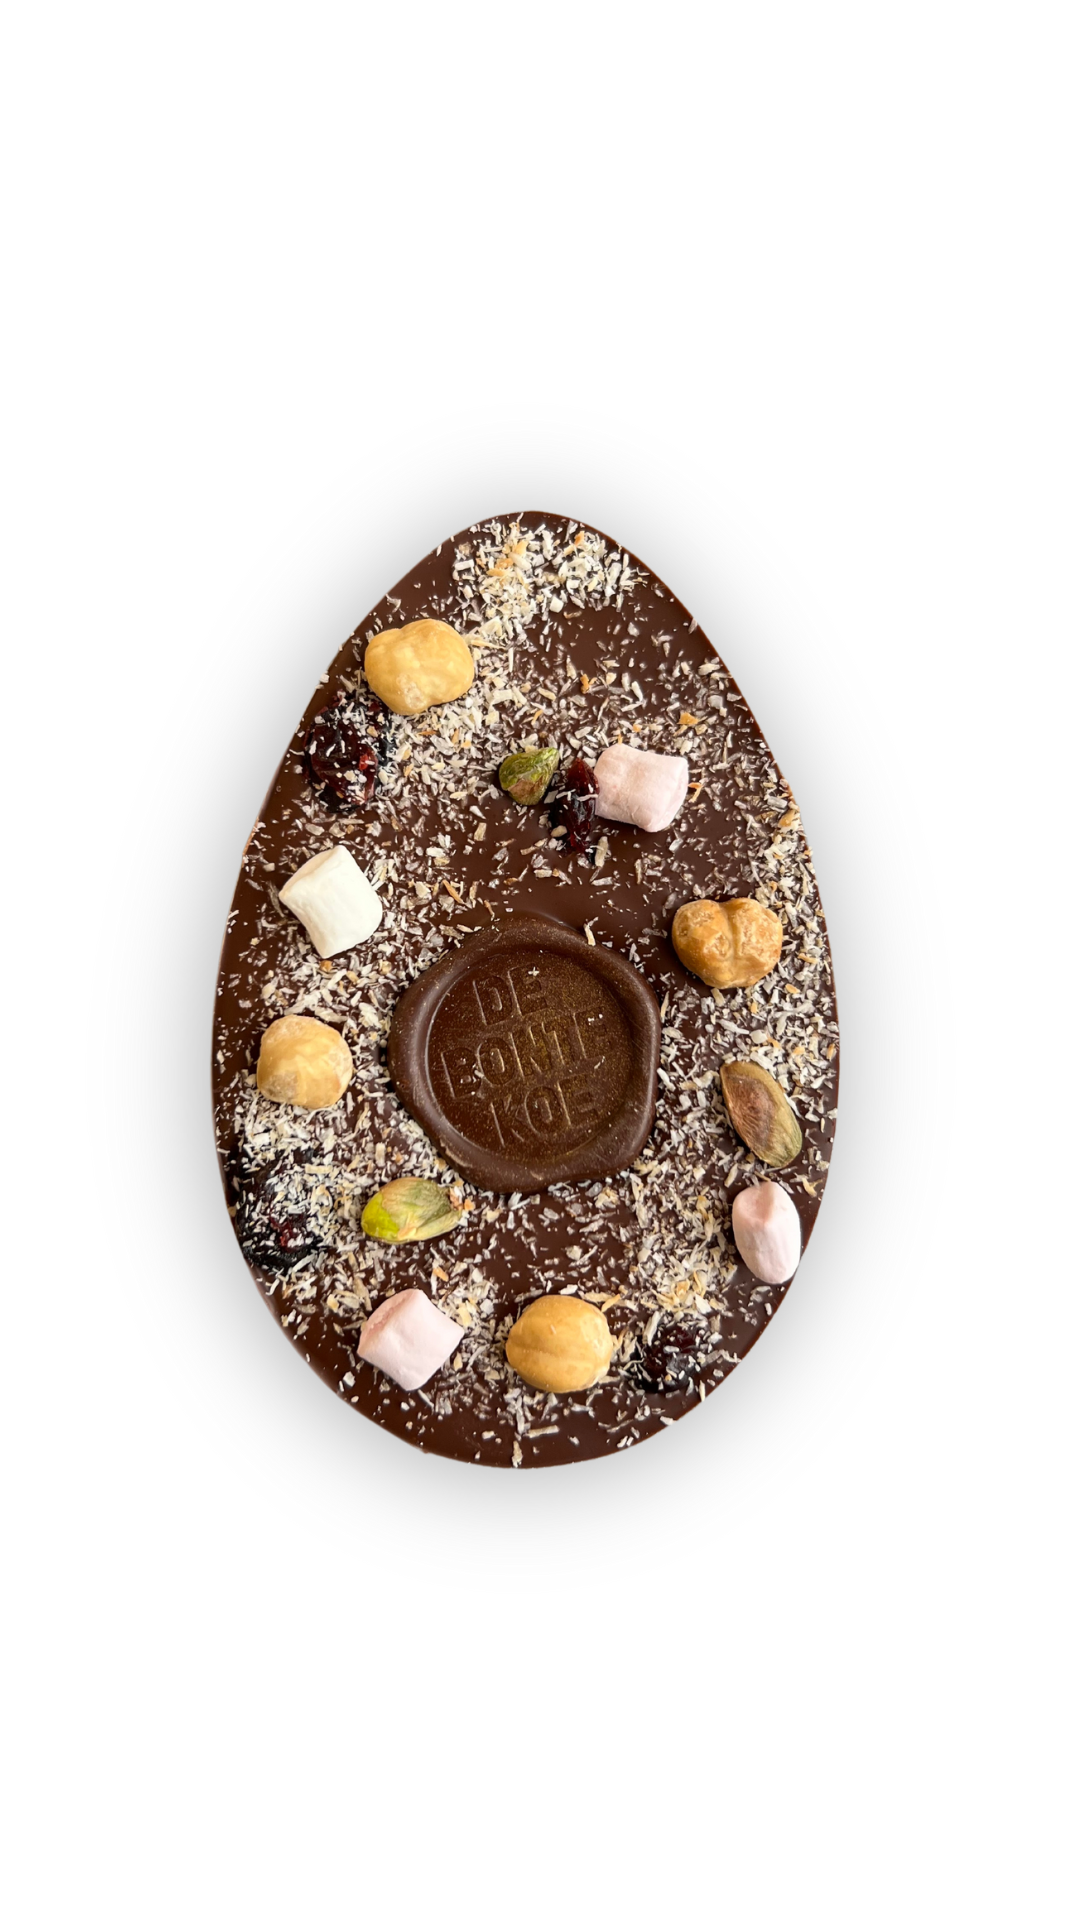 Mailbox Easter egg | Rocky Road